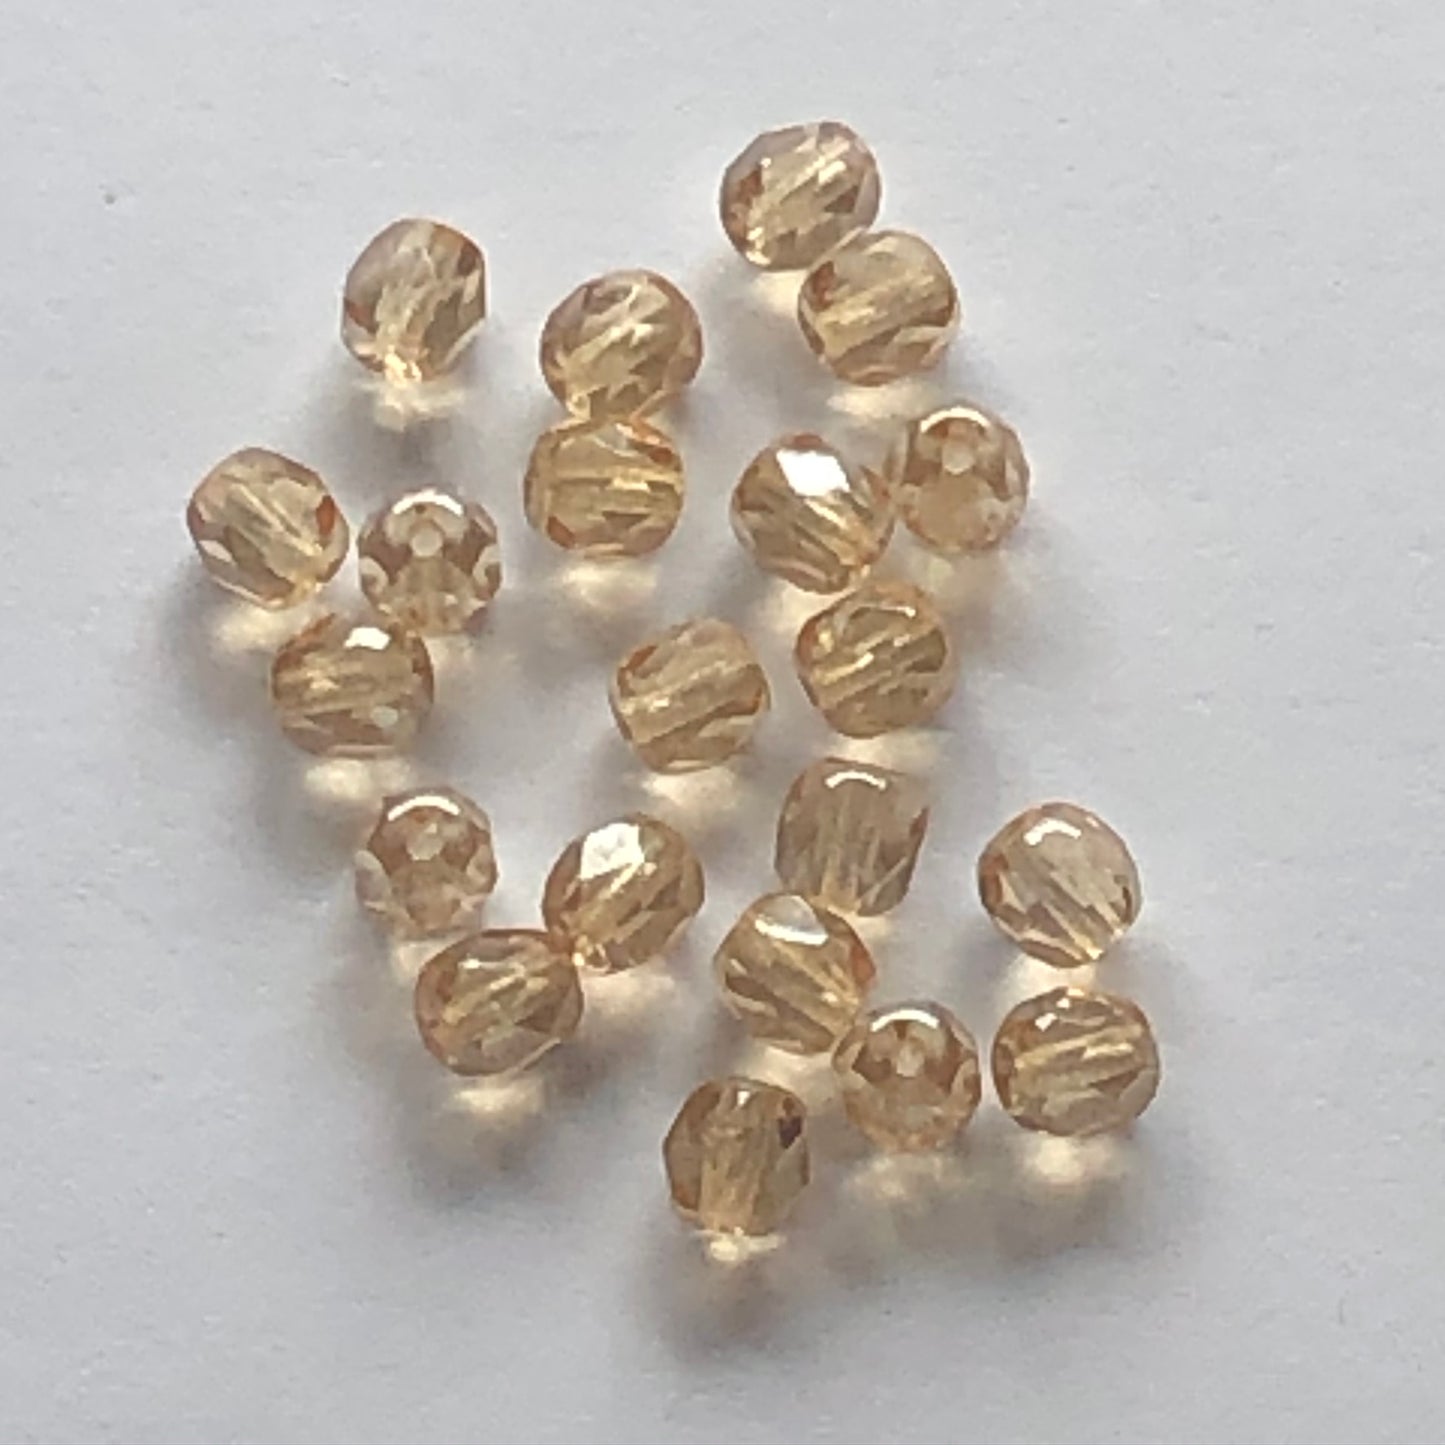 Czech Fire Polished Crystal Champagne Faceted Round Beads, 4 mm - 15 or 25 Beads